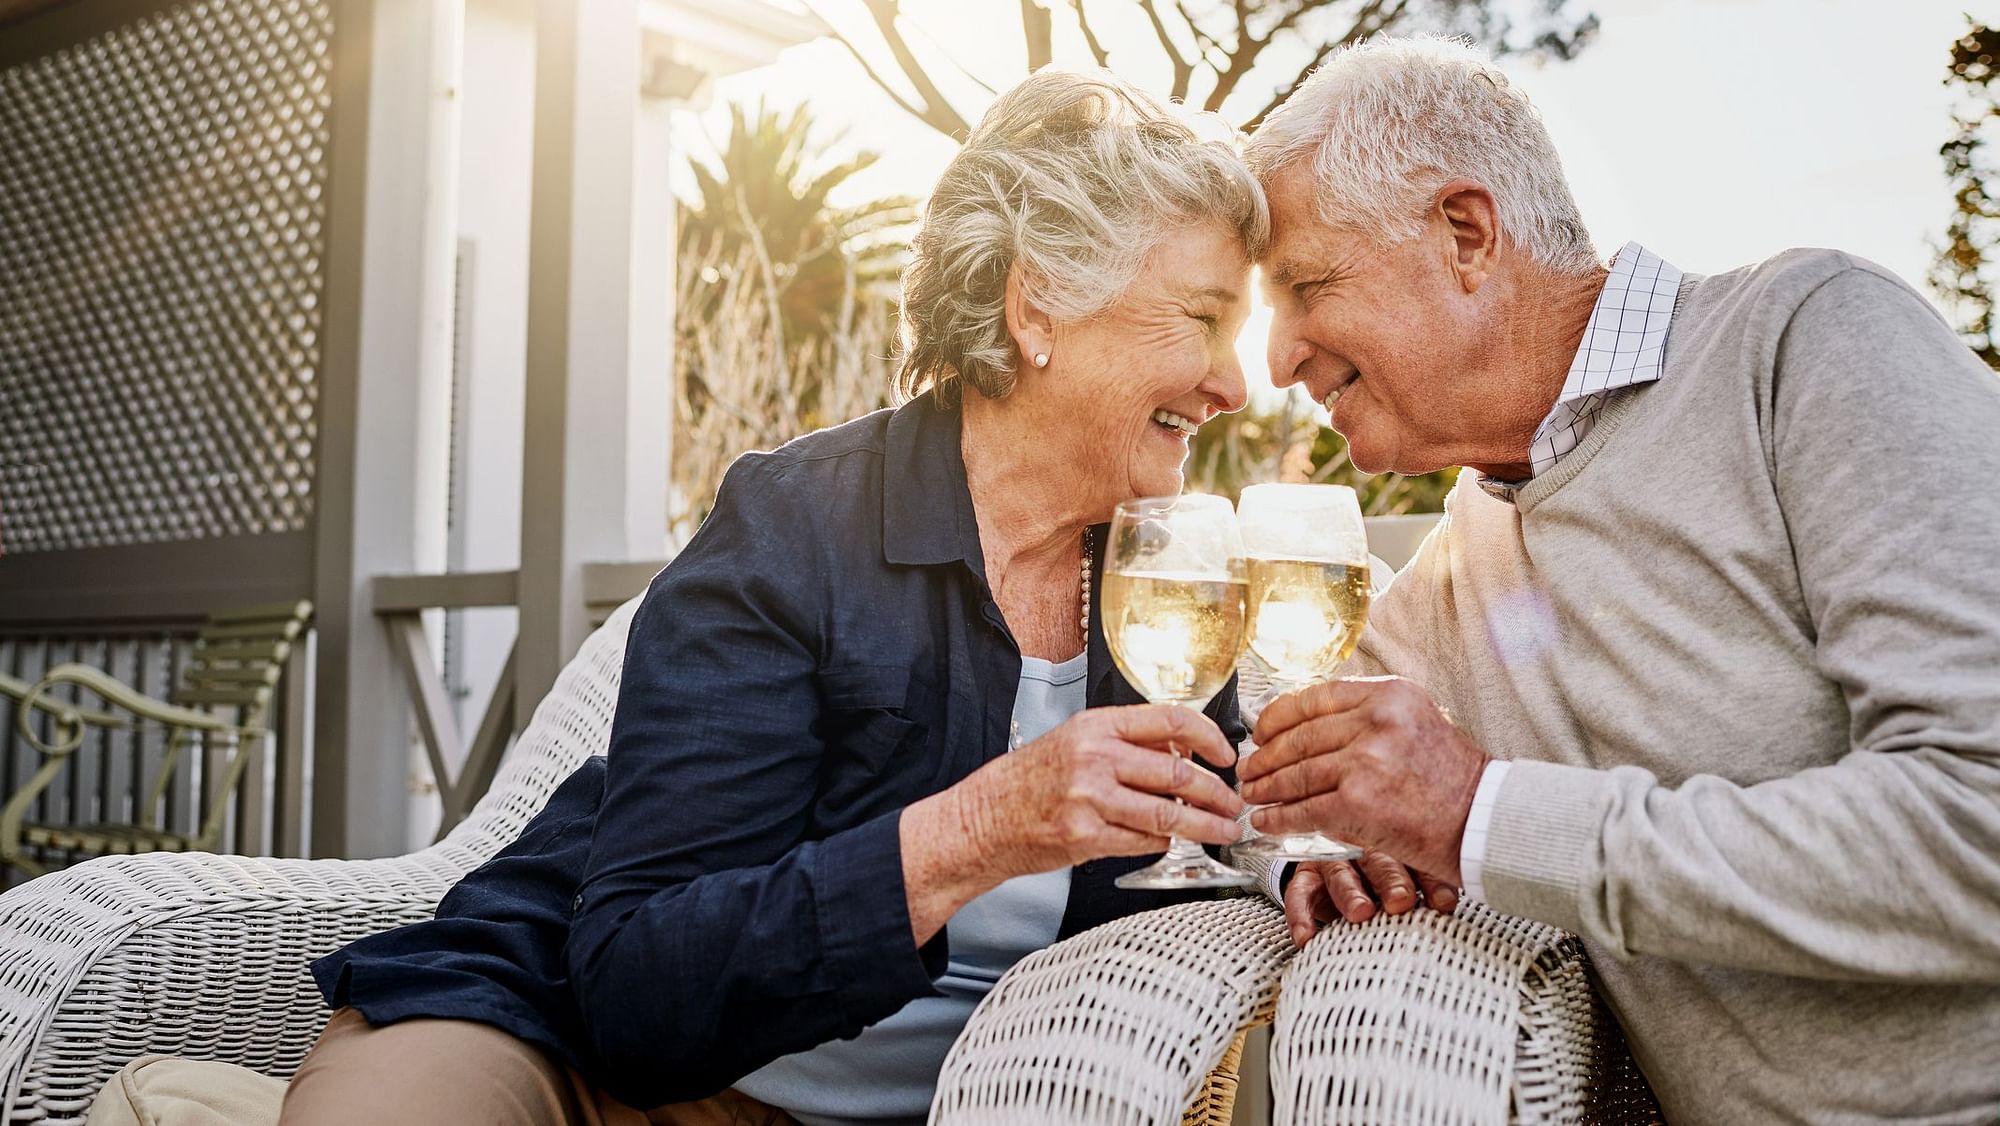 Elderly people above 65 who are newly diagnosed with heart failure can continue moderate alcohol drinking without worsening their condition, a new study suggests.